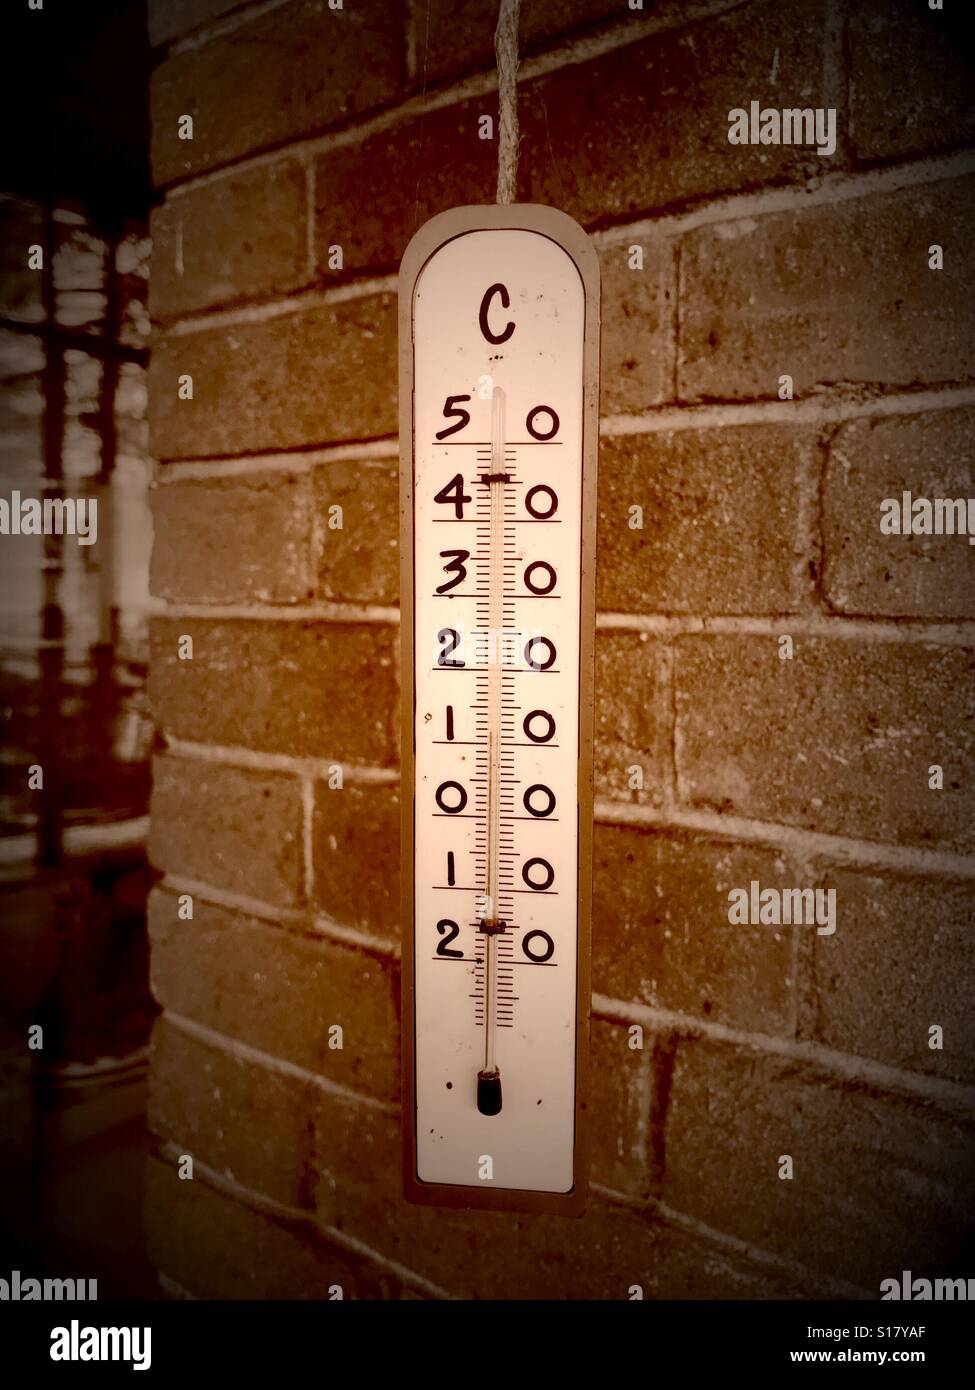 https://c8.alamy.com/comp/S17YAF/thermometer-degrees-environment-vintage-air-S17YAF.jpg